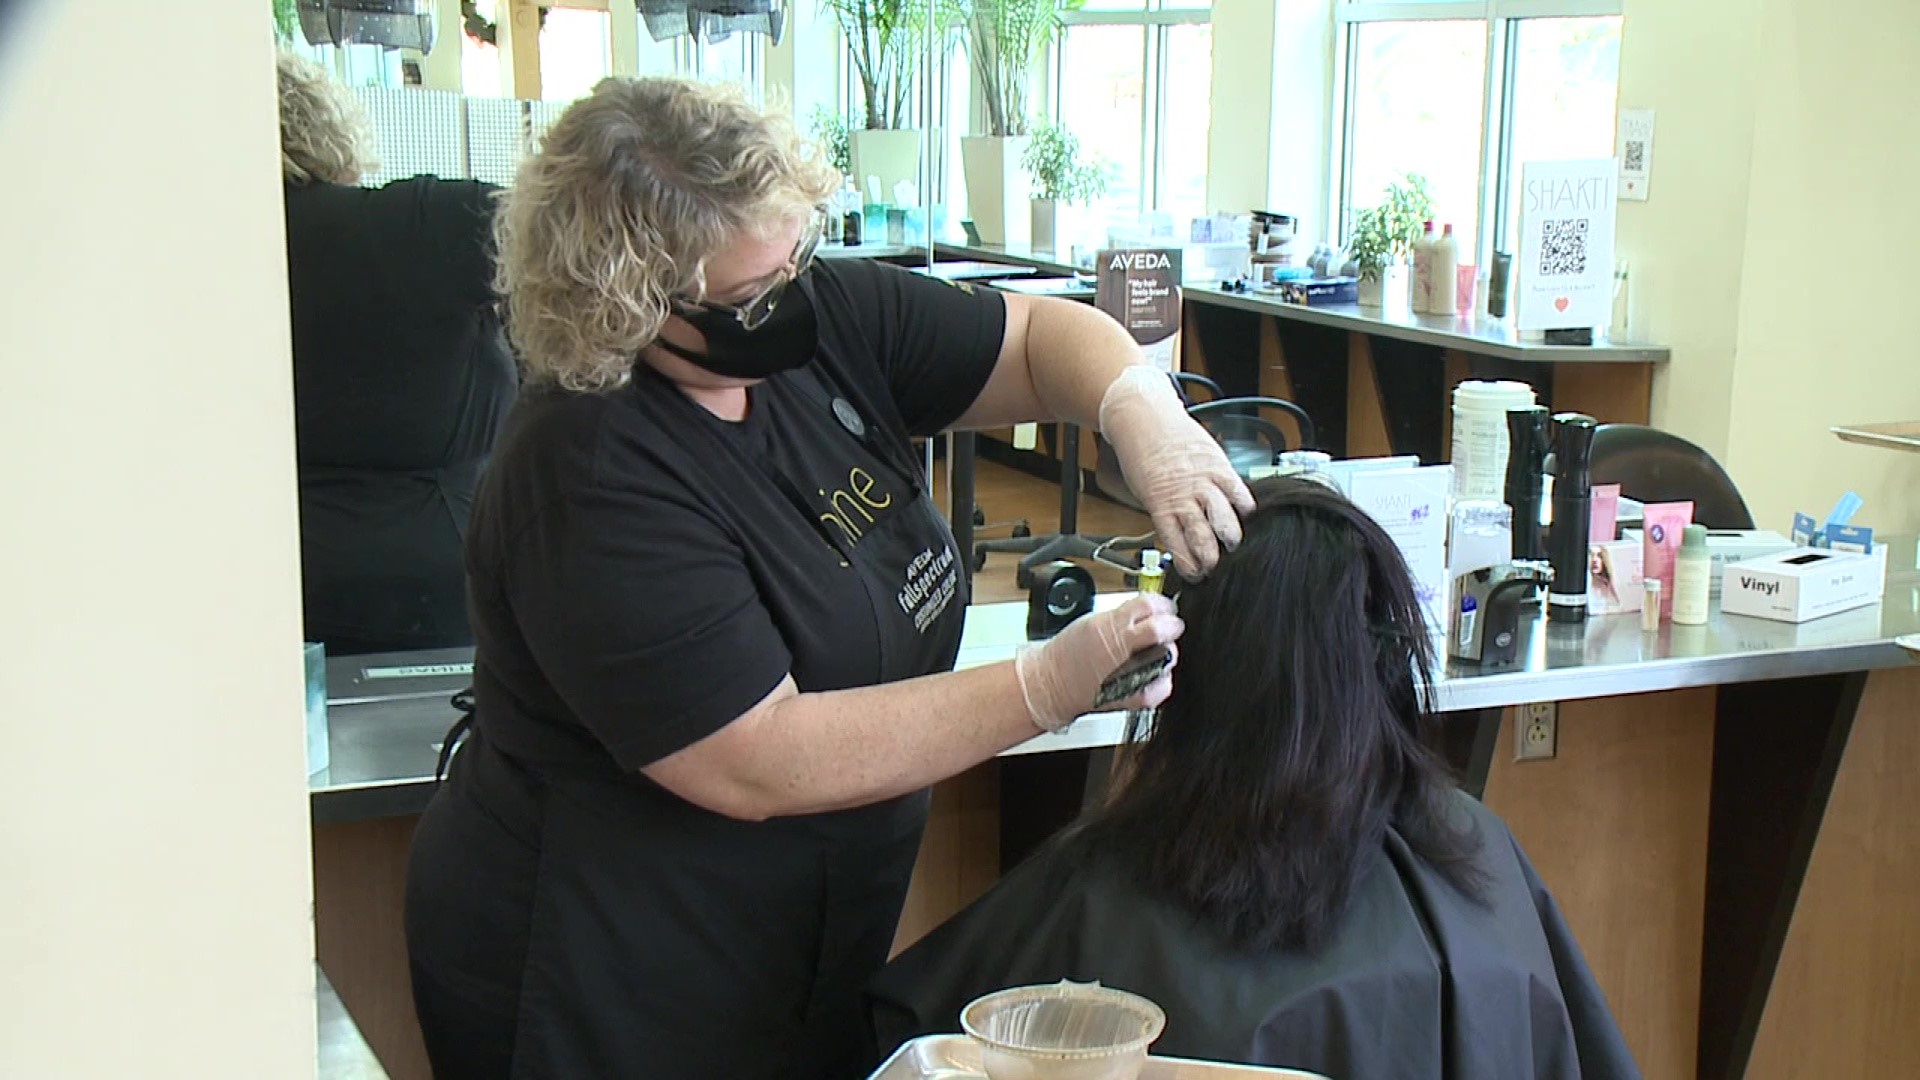 A hair salon in Kington says it's prepared for anything the pandemic sends its way.